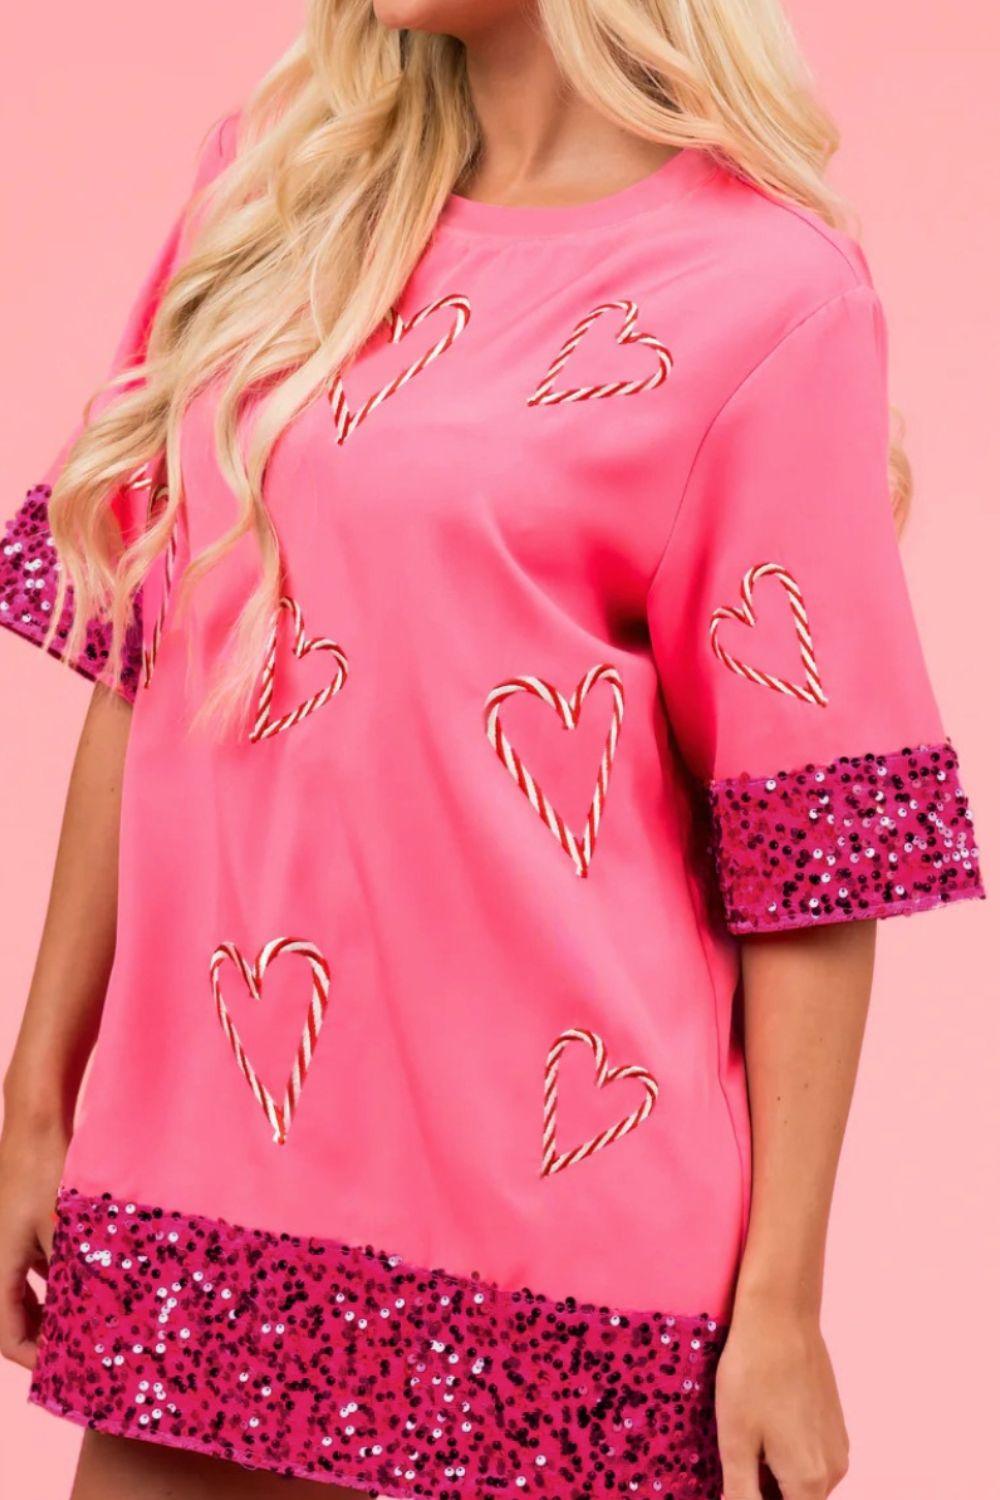 a woman wearing a pink top with hearts on it